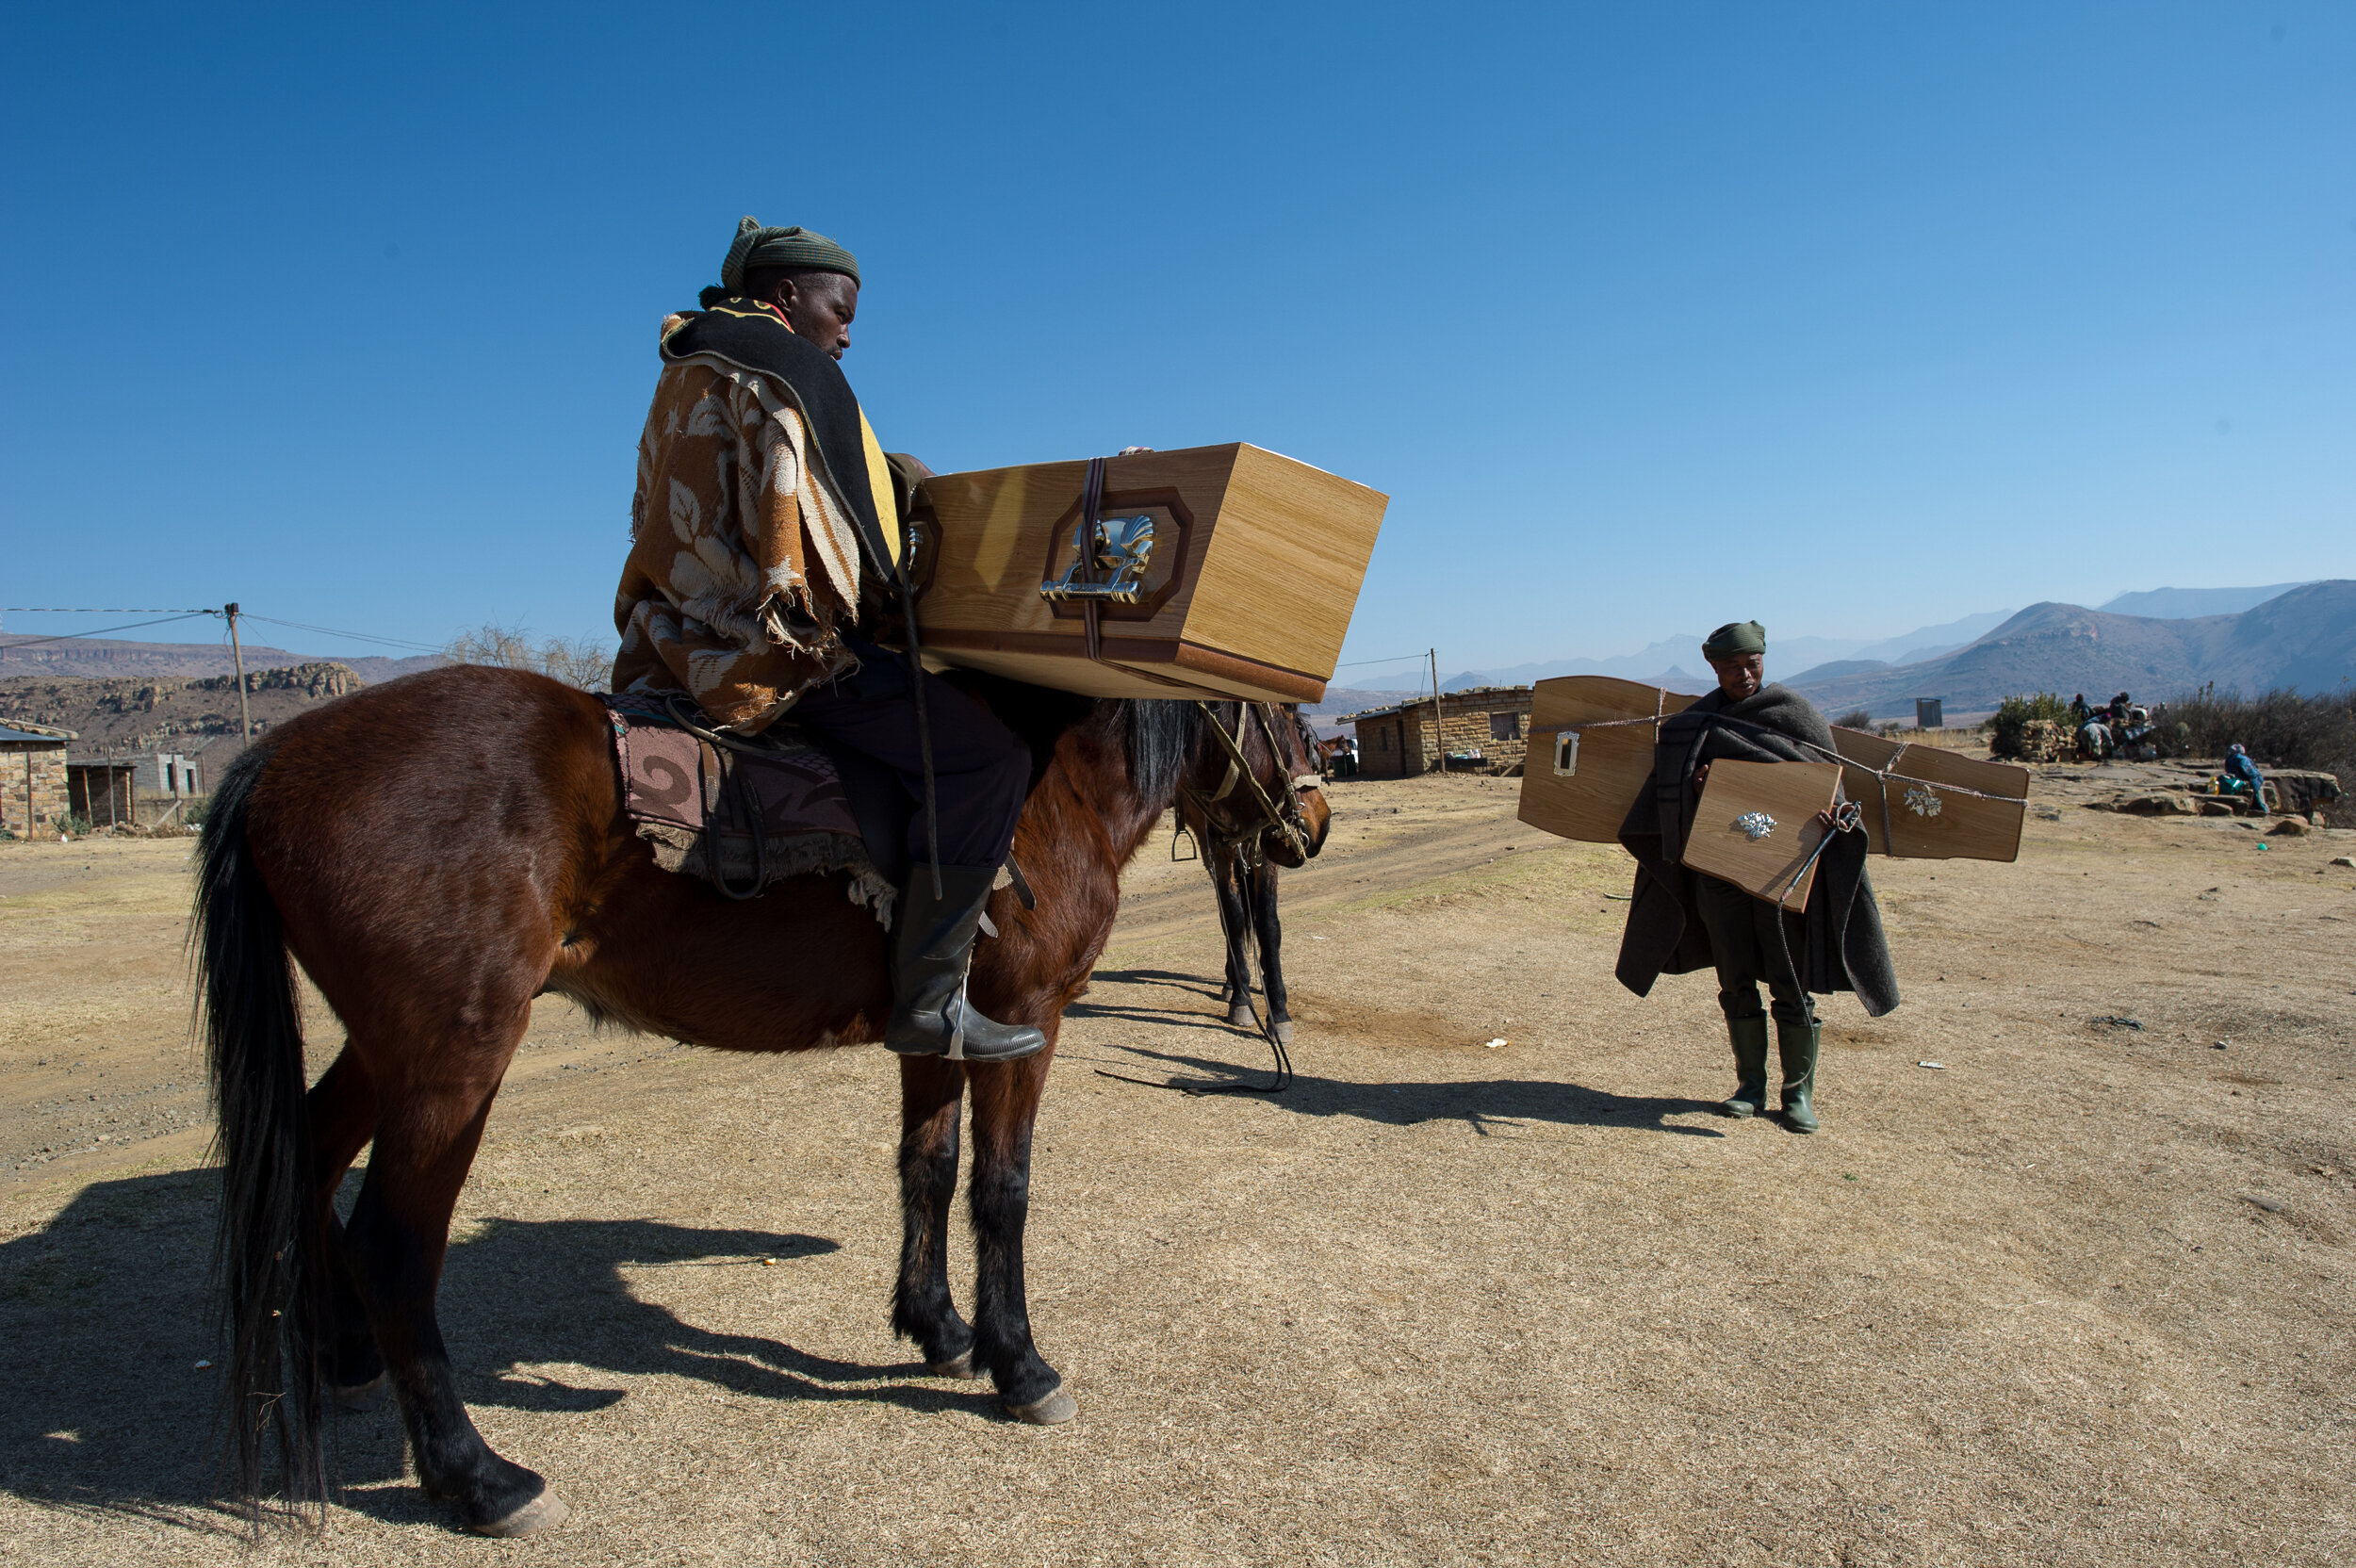  15 July 2011. White Hill, Lesotho. Crossing the Senqu river on horseback is only possible in winter, before the rainy season makes it impossible to cross. These two men are collecting a coffin for the burial of an elderly family member in their vill